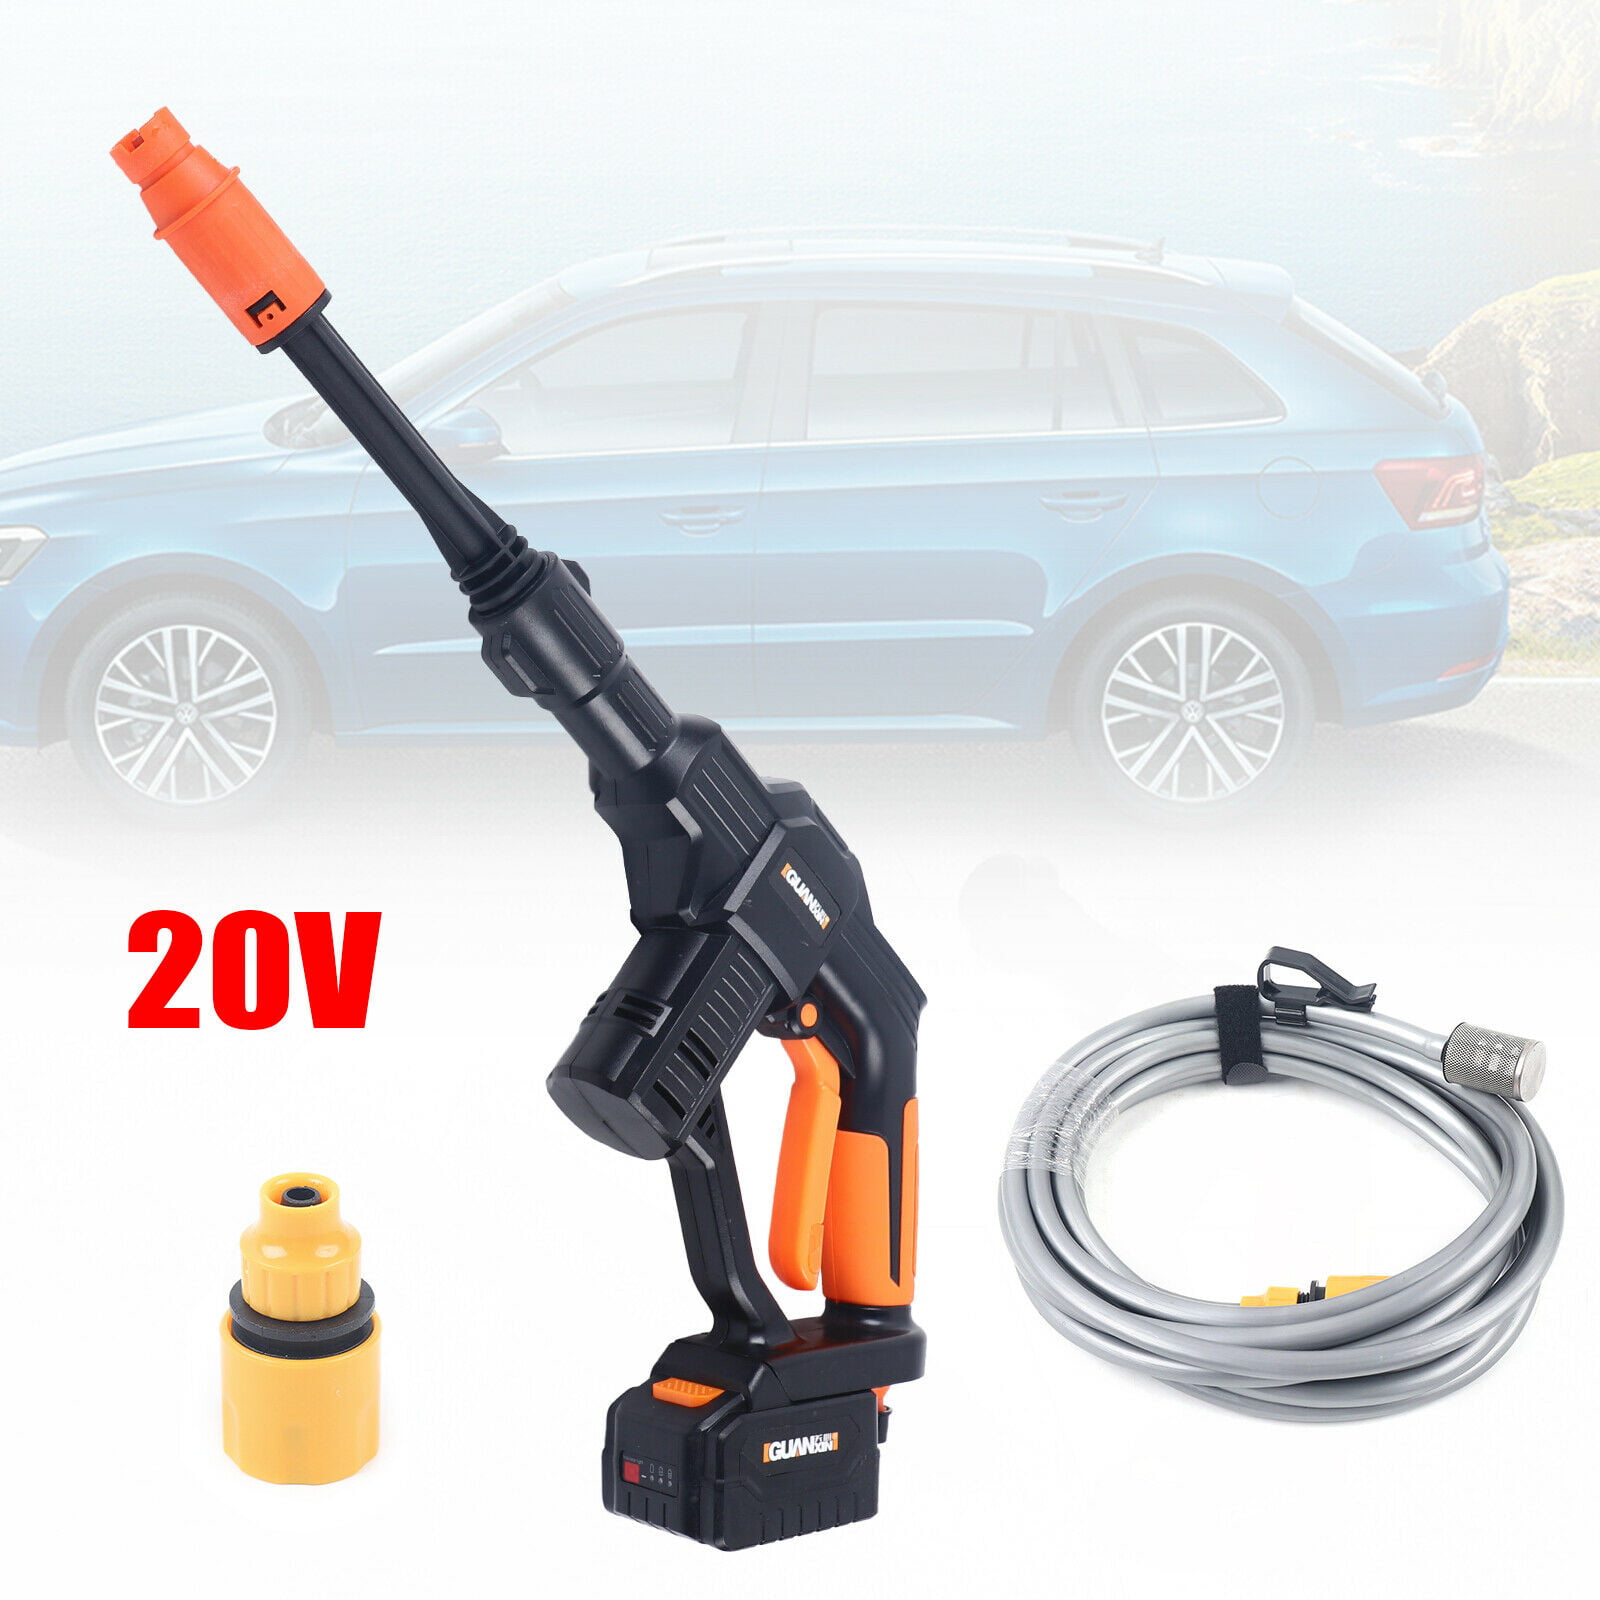 30Bar/435 PSI Pressure Washer Cleaner Cordless Floor 24V Battery Power Washer for Cars with 2.0Ah Battery Window Patio Garden 6 in 1 Spray Lance for Car Washing Variable Speed